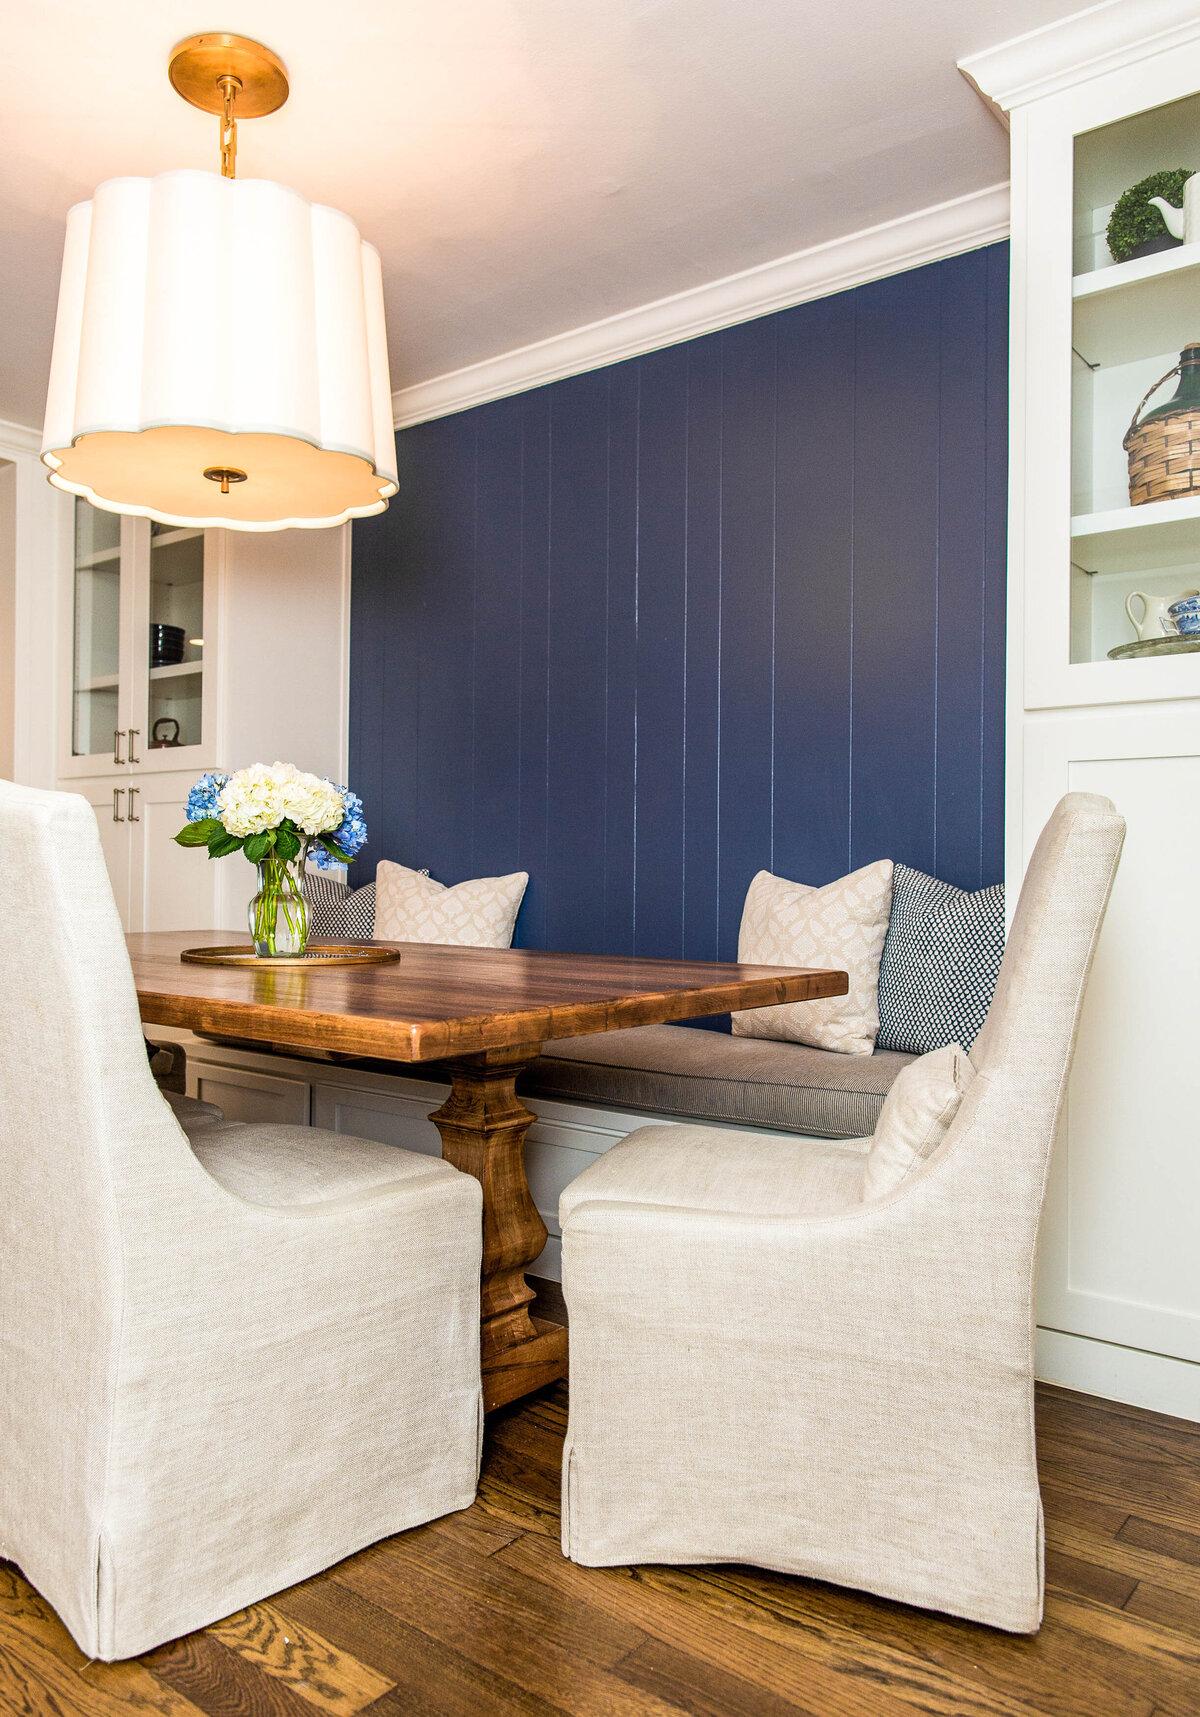 Breakfast nook with classic style